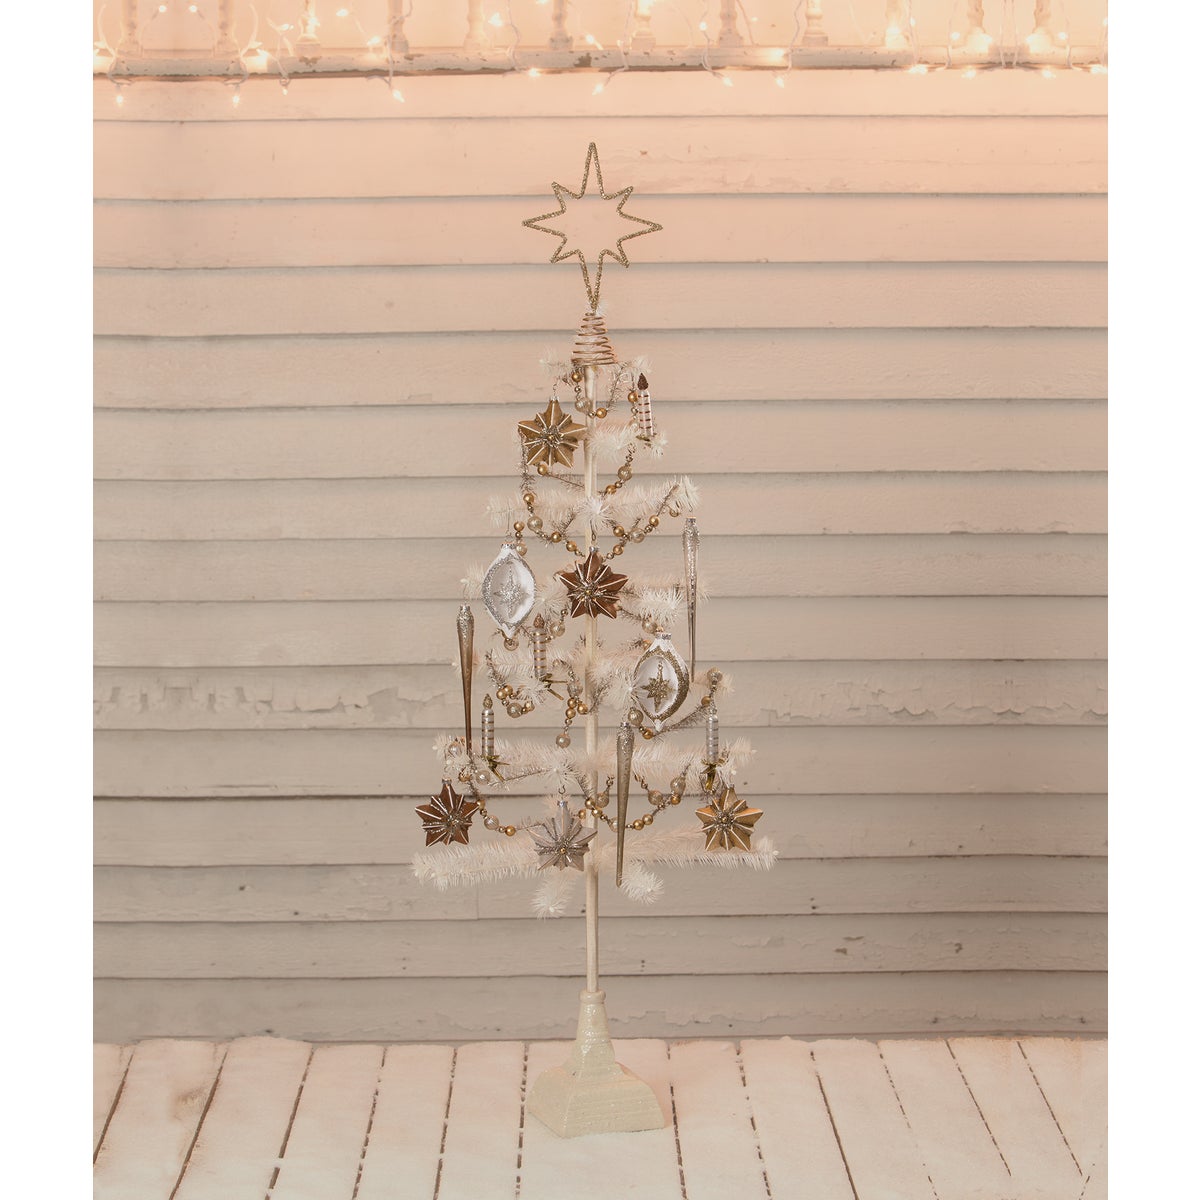 Metallic Striped Candle Ornaments S4